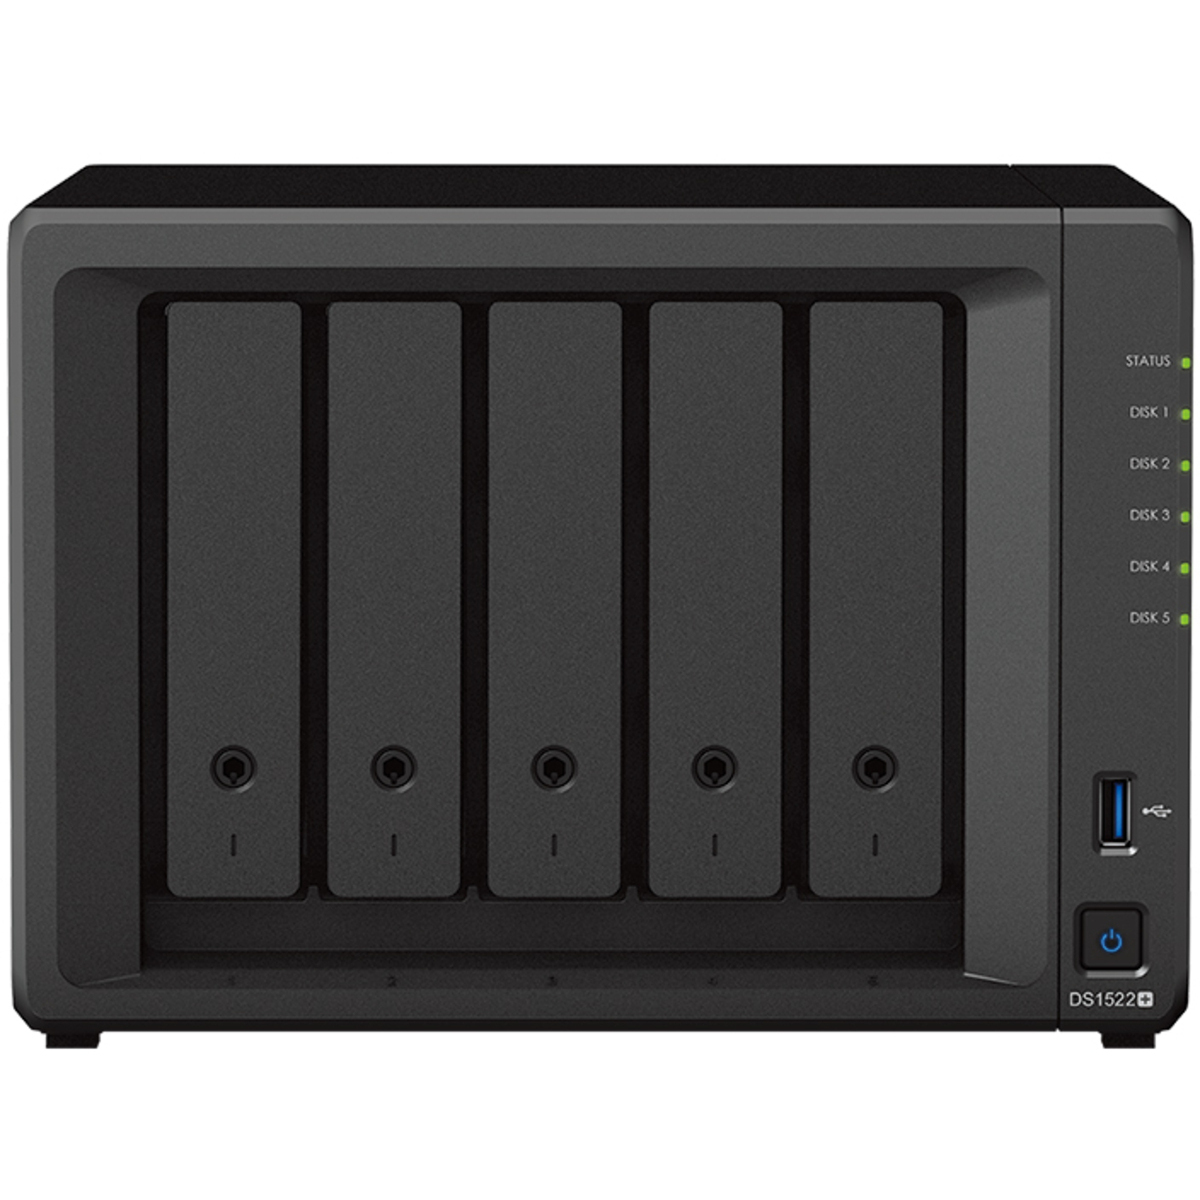 Synology DiskStation DS1522+ 120tb 5-Bay Desktop Multimedia / Power User / Business NAS - Network Attached Storage Device 5x24tb Western Digital Red Pro WD240KFGX 3.5 7200rpm SATA 6Gb/s HDD NAS Class Drives Installed - Burn-In Tested - ON SALE DiskStation DS1522+